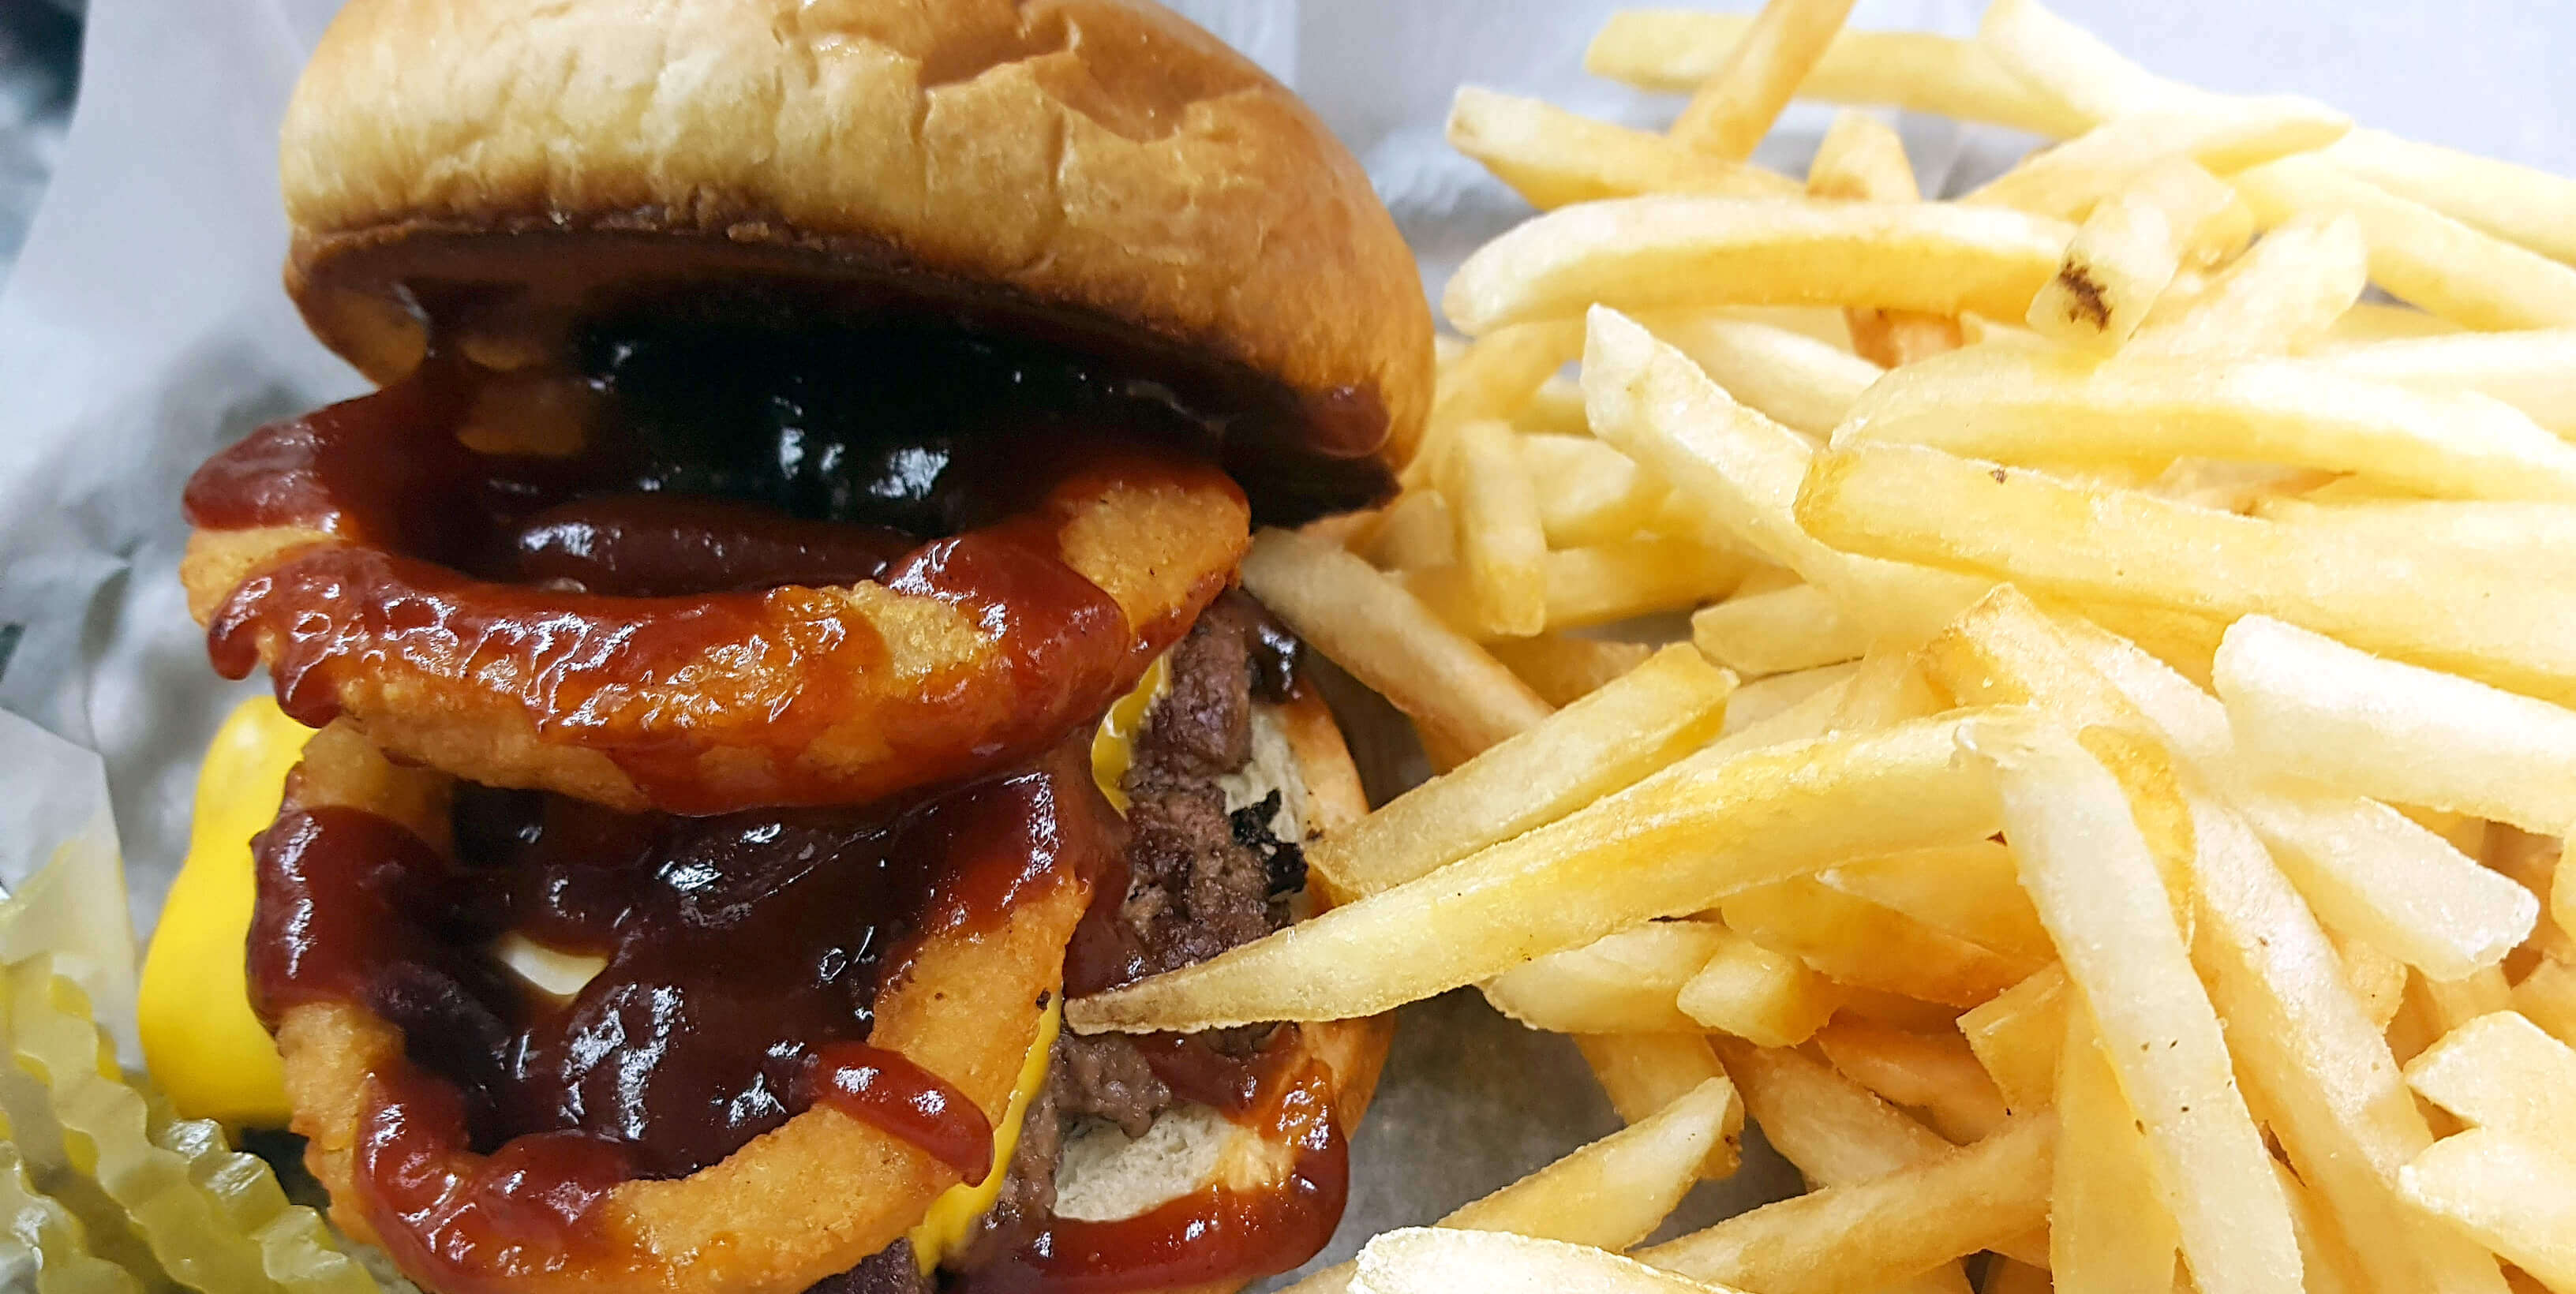 BBQ Onion Ring Burger and Fries from Main Gate Bar & Grill